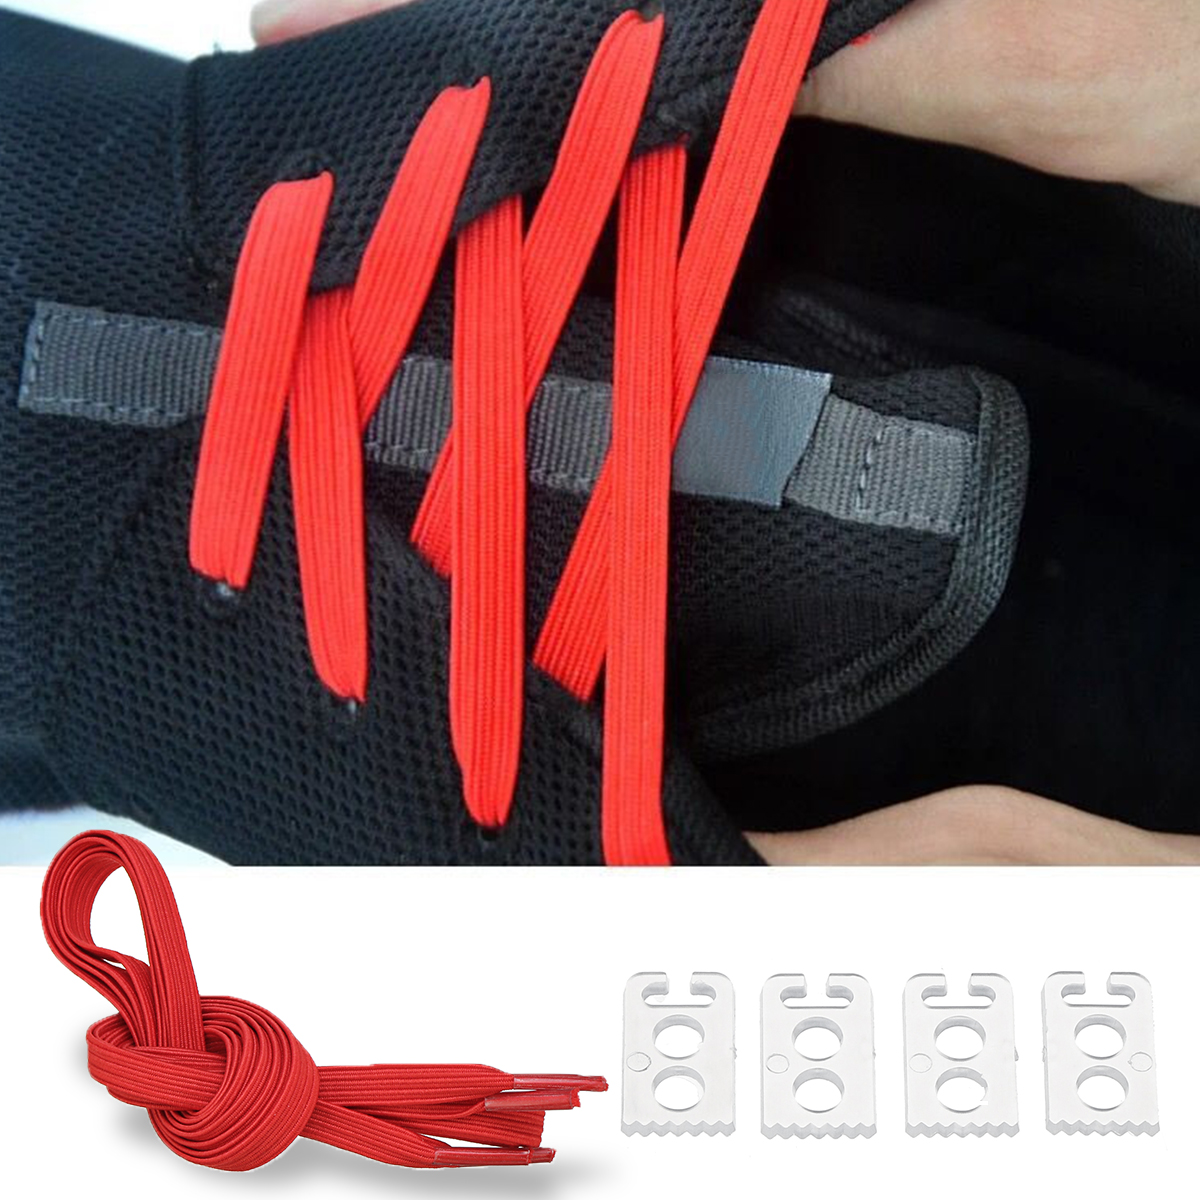 2Pcs-100cm-Elastic-No-Tie-Shoelaces-Lazy-Free-Tie-Sneaker-Laces-With-Buckles-Sports-Running-1470098-8